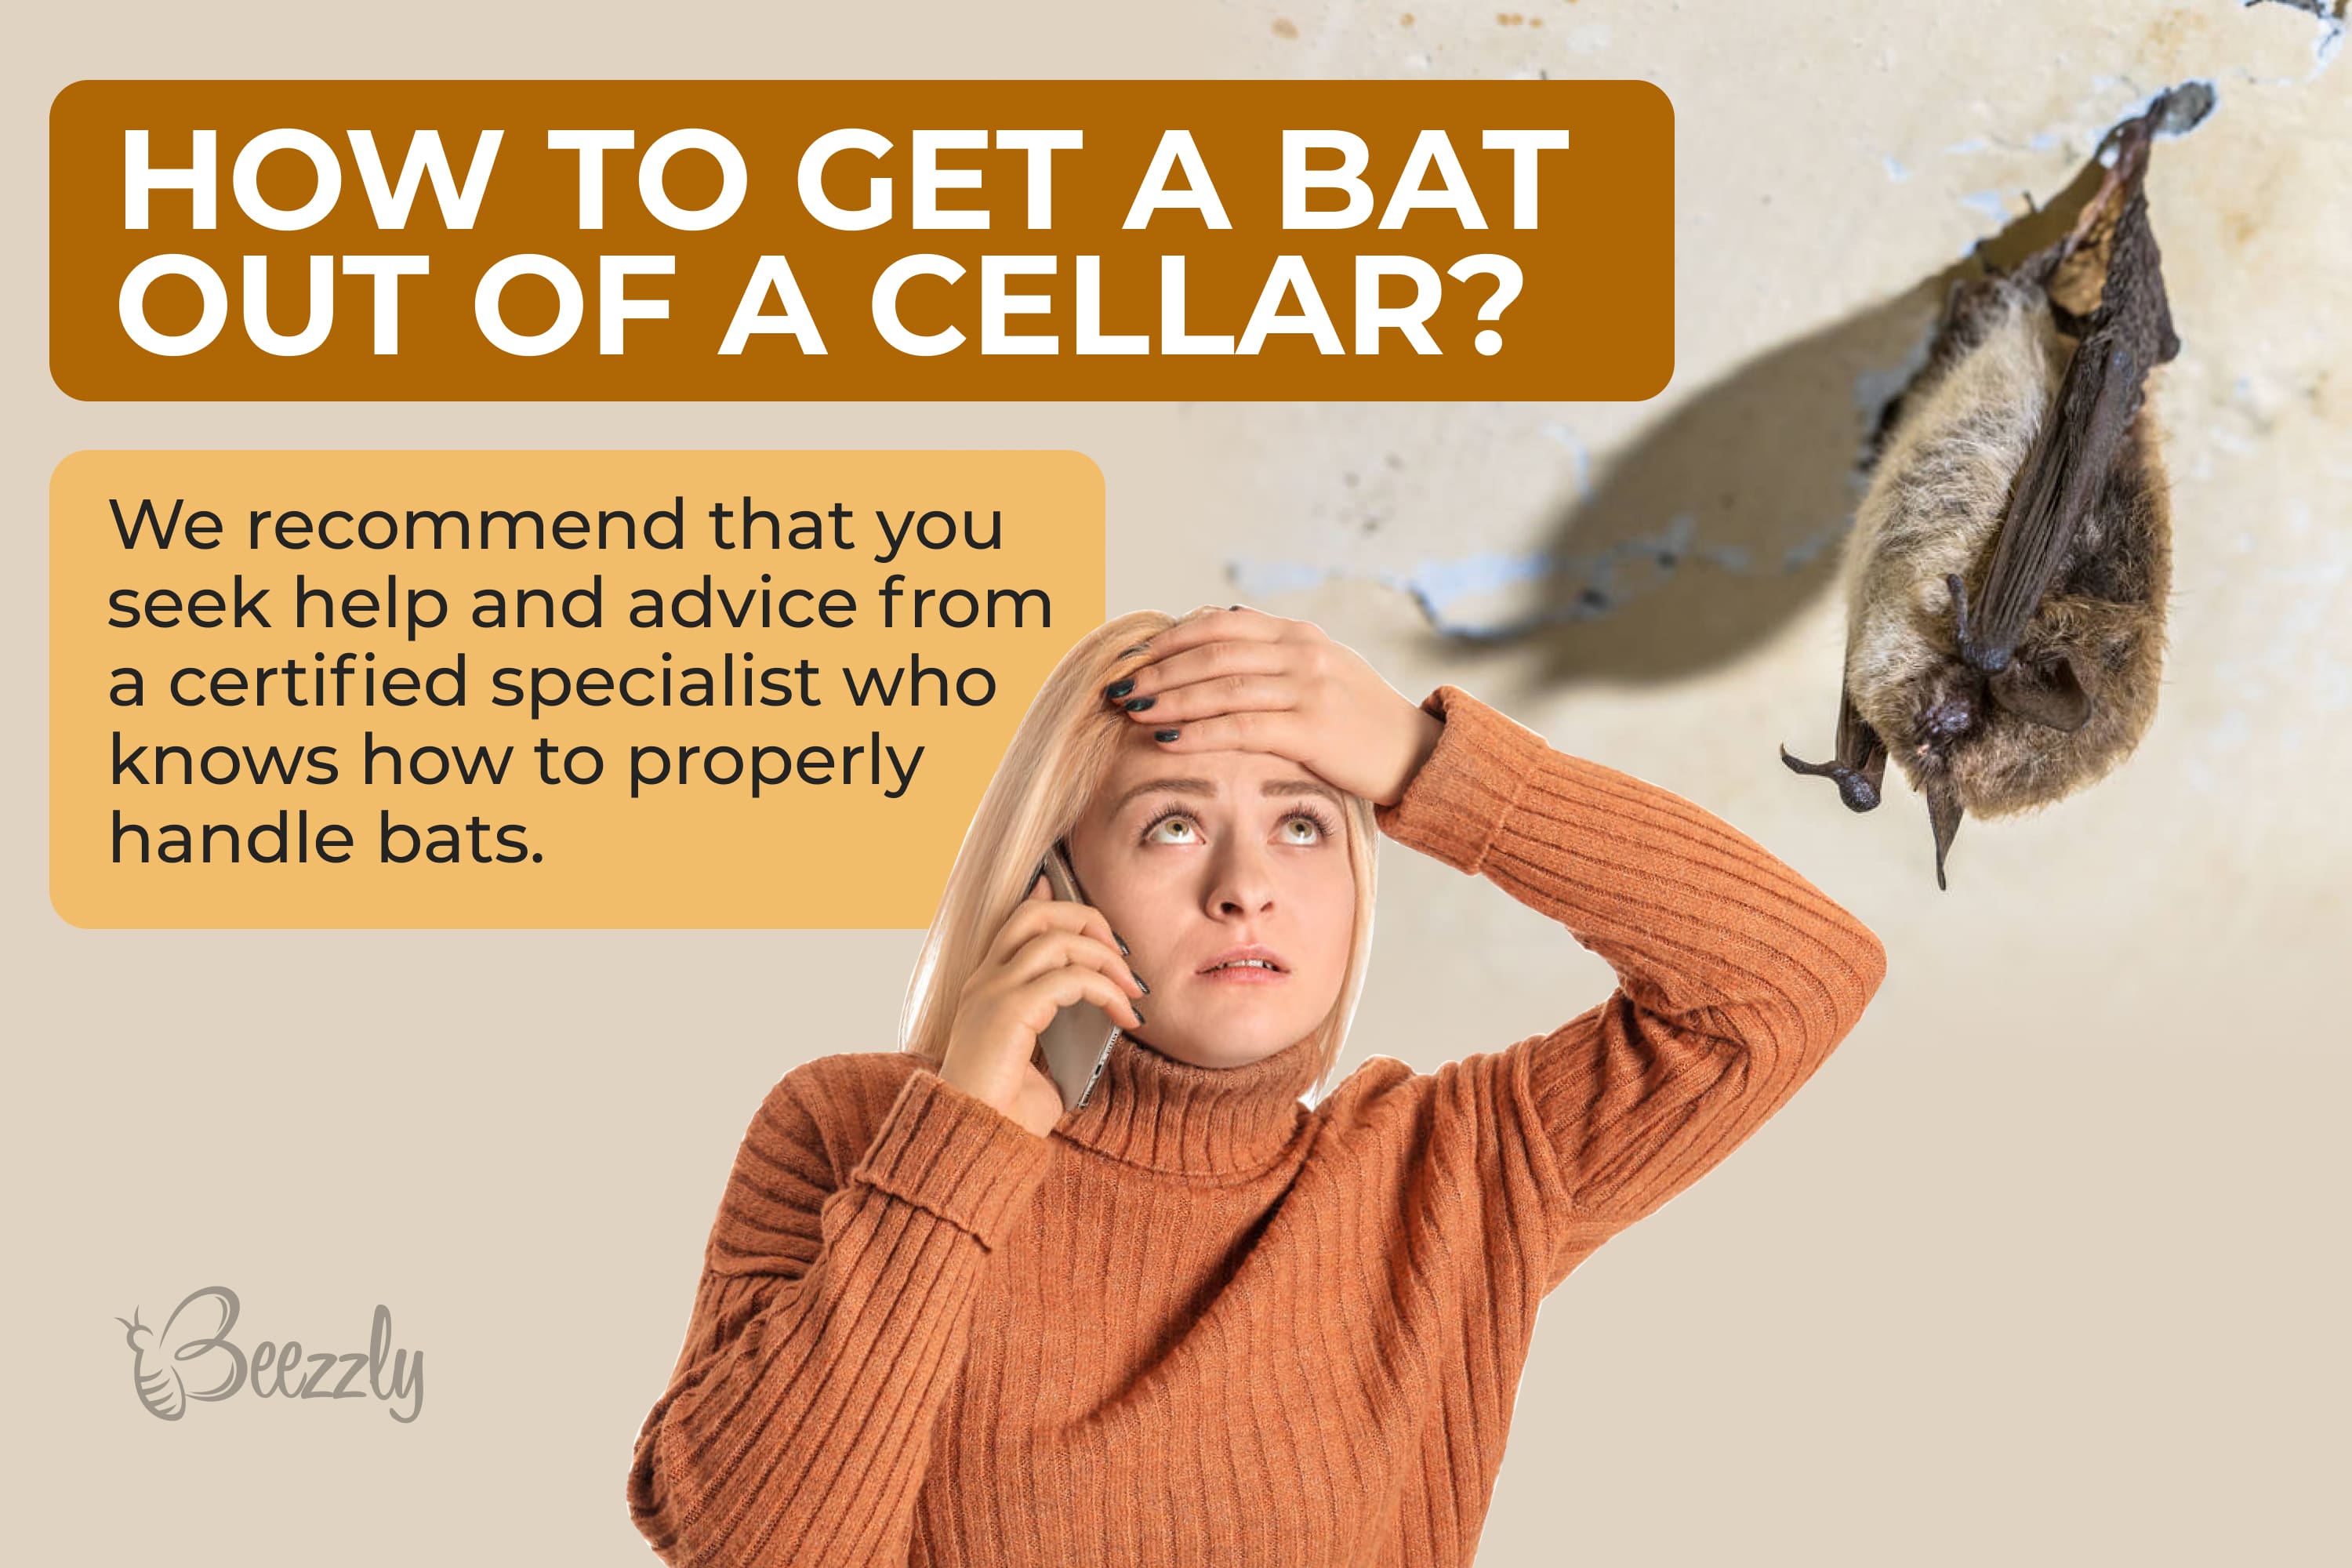 How to get a bat out of a cellar